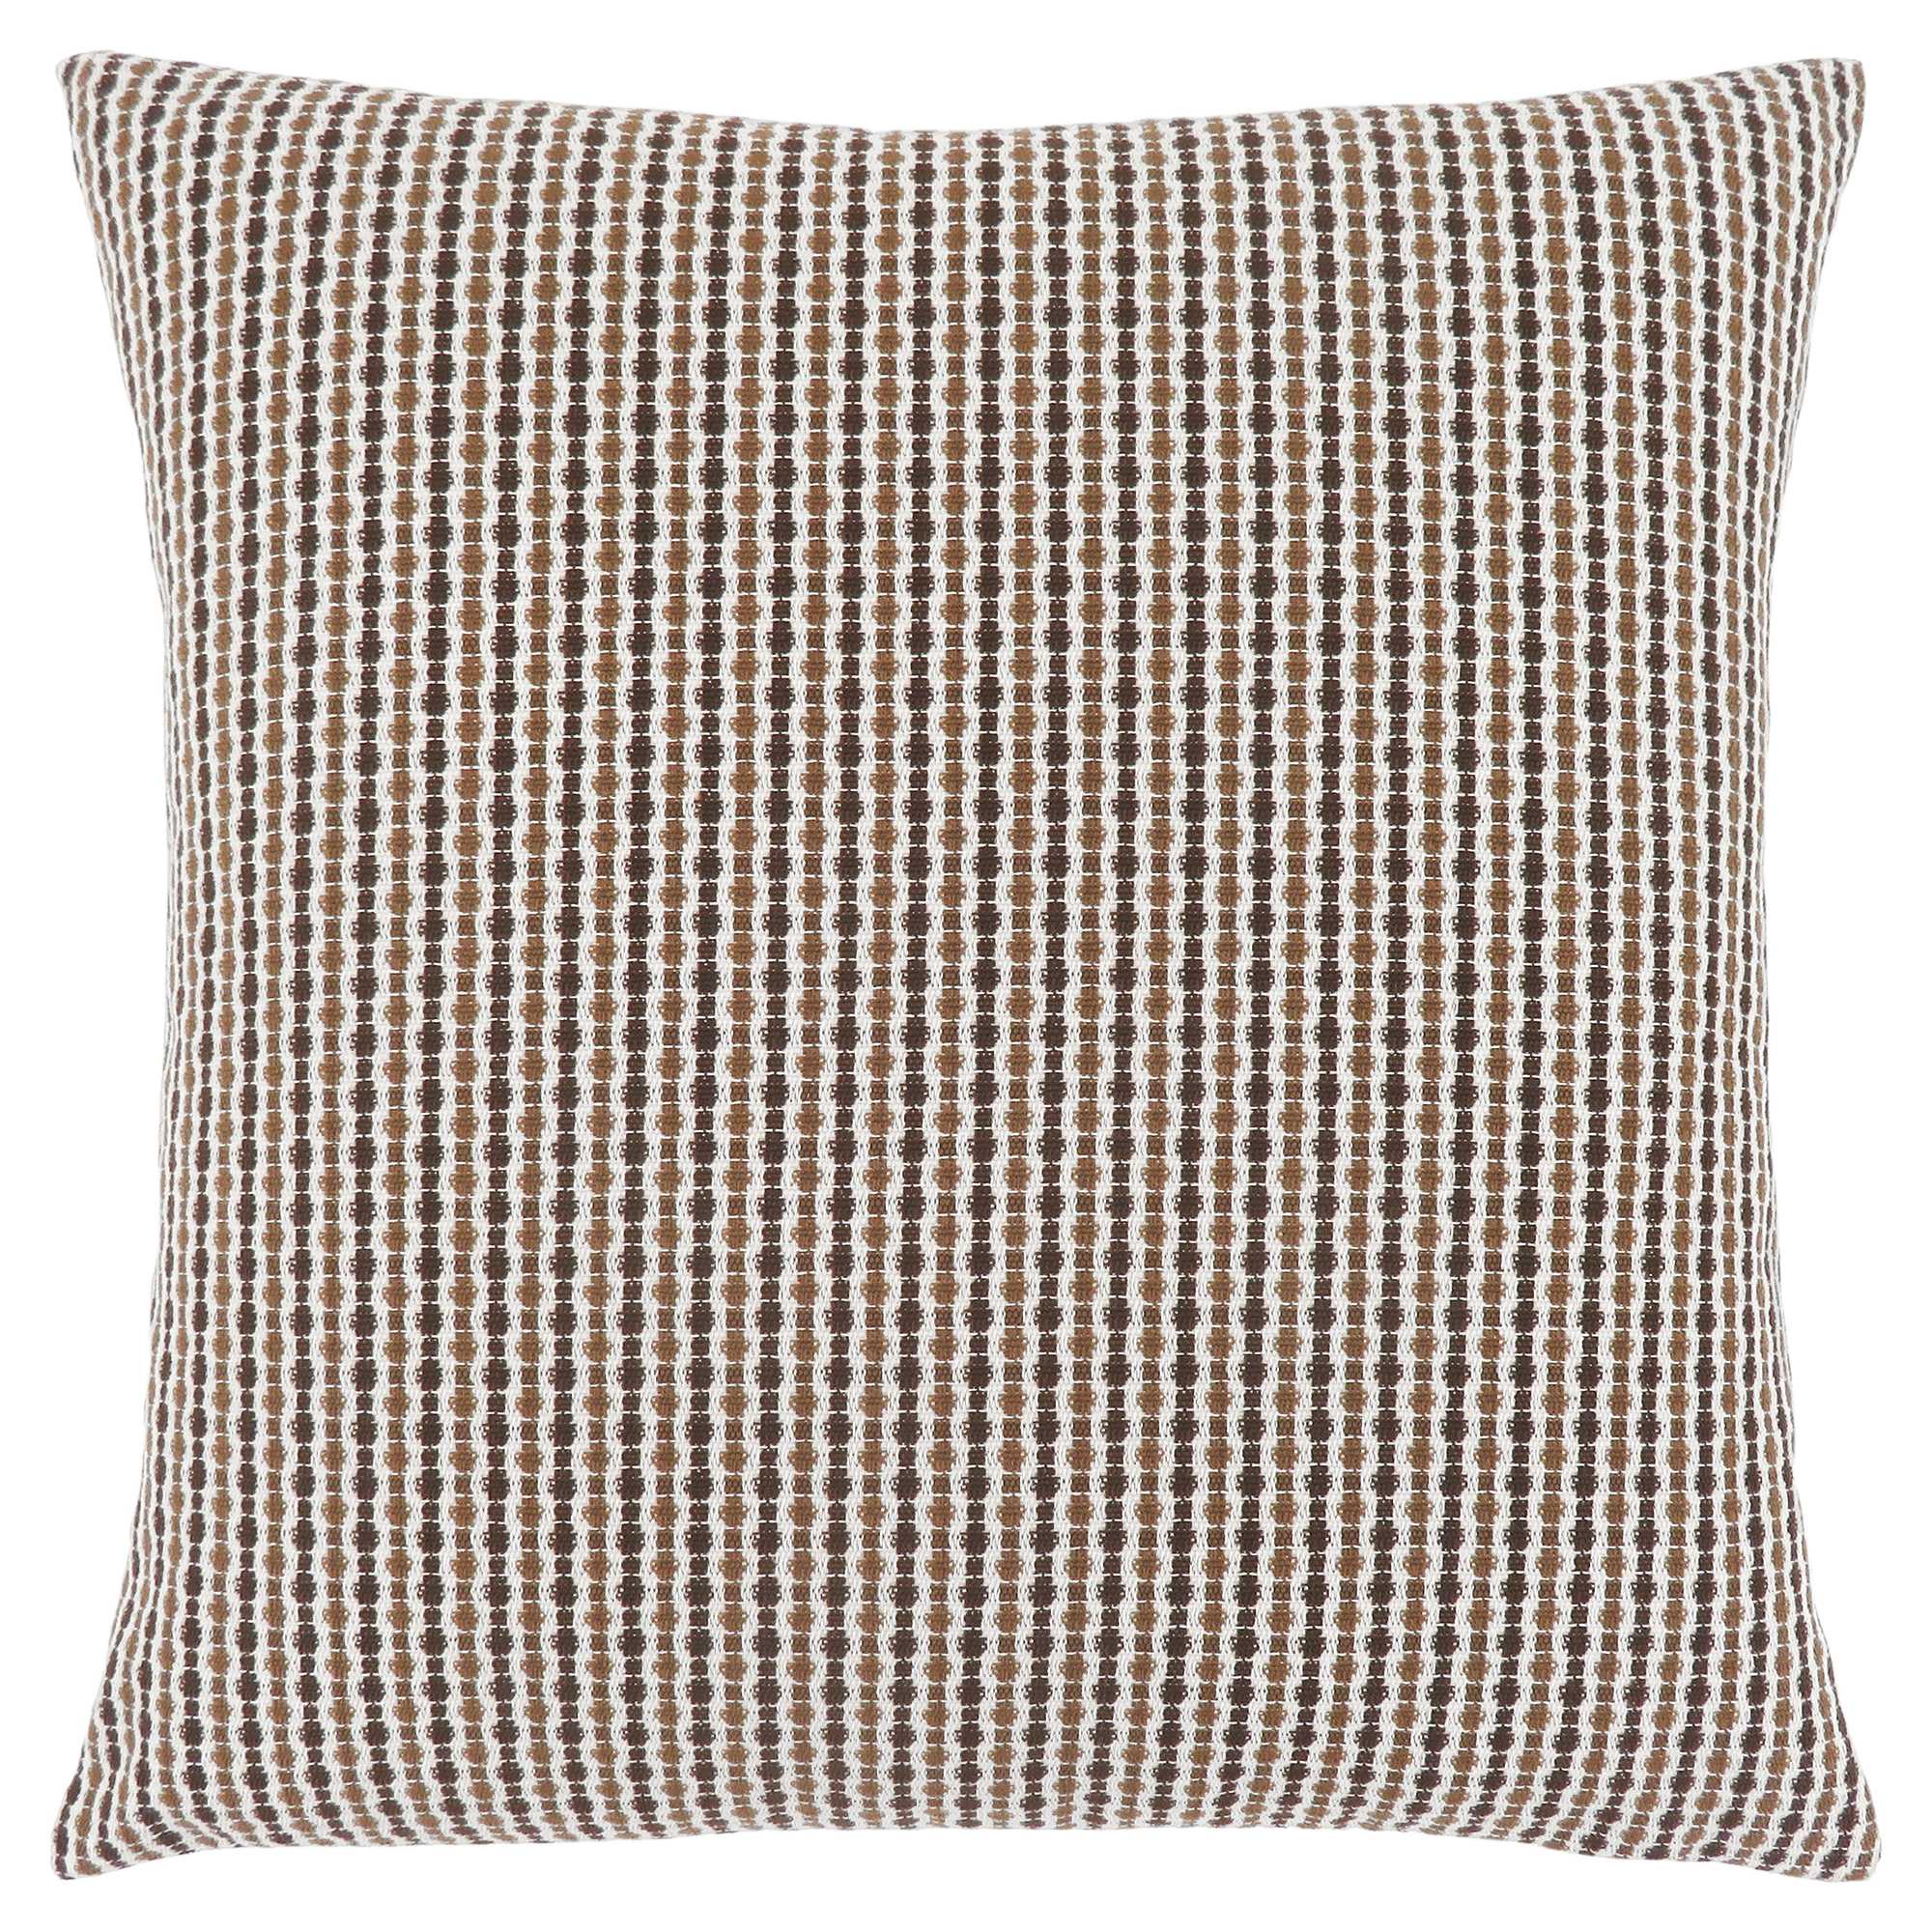 18" X 18" Brown and White Polyester Striped Zippered Pillow-344022-1